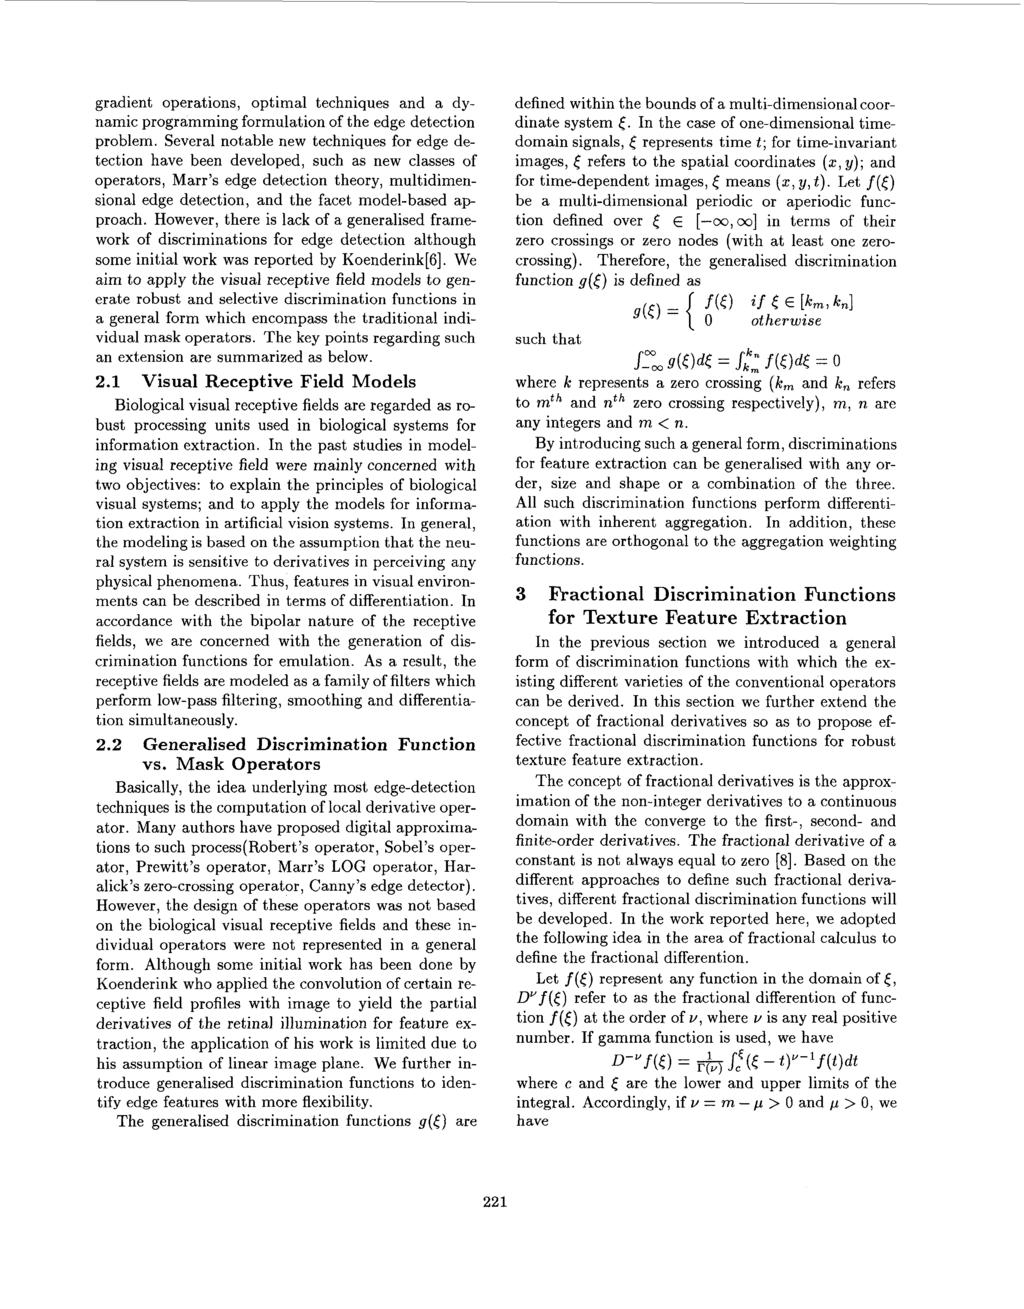 gradient operations, optimal techniques and a dynamic programming formulation of the edge detection problem.